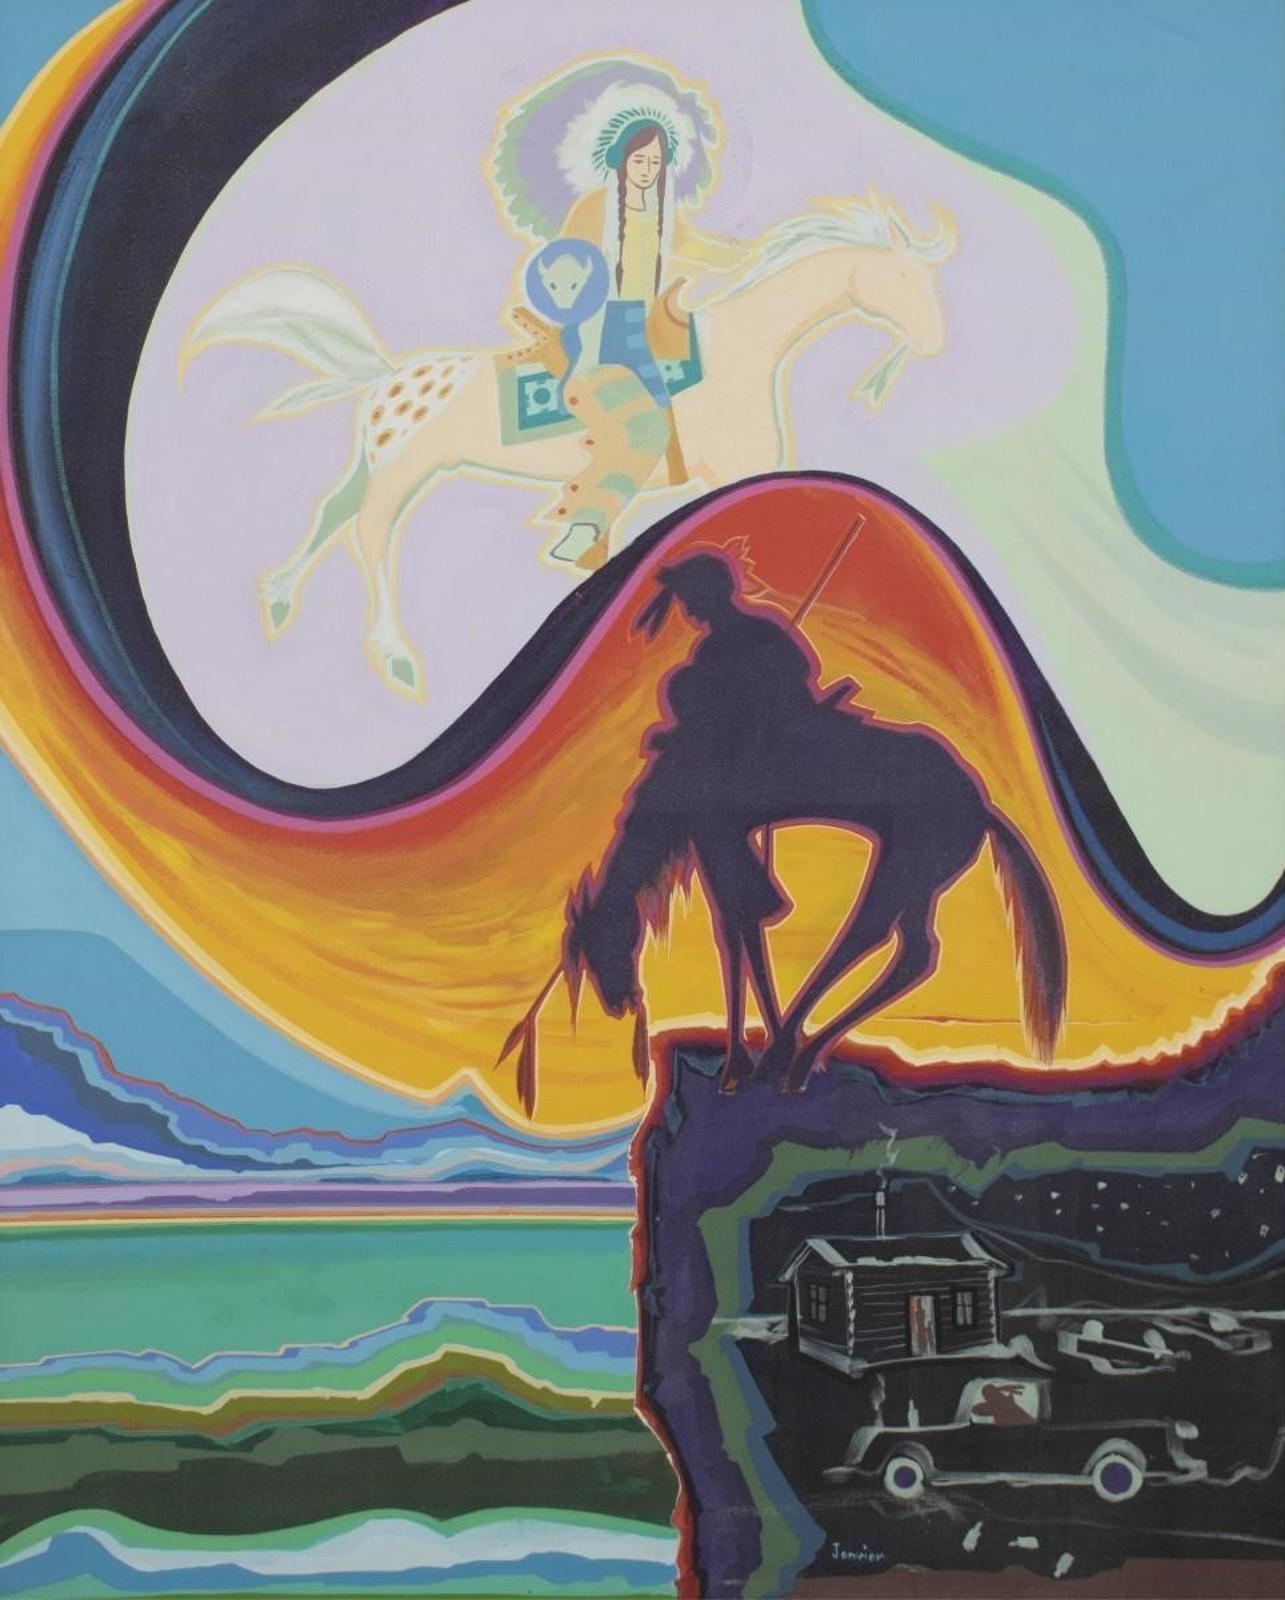 Alex Simeon Janvier (1935) - Indians Unlimited (On The Trail To Happy Hunting Grounds); 1990